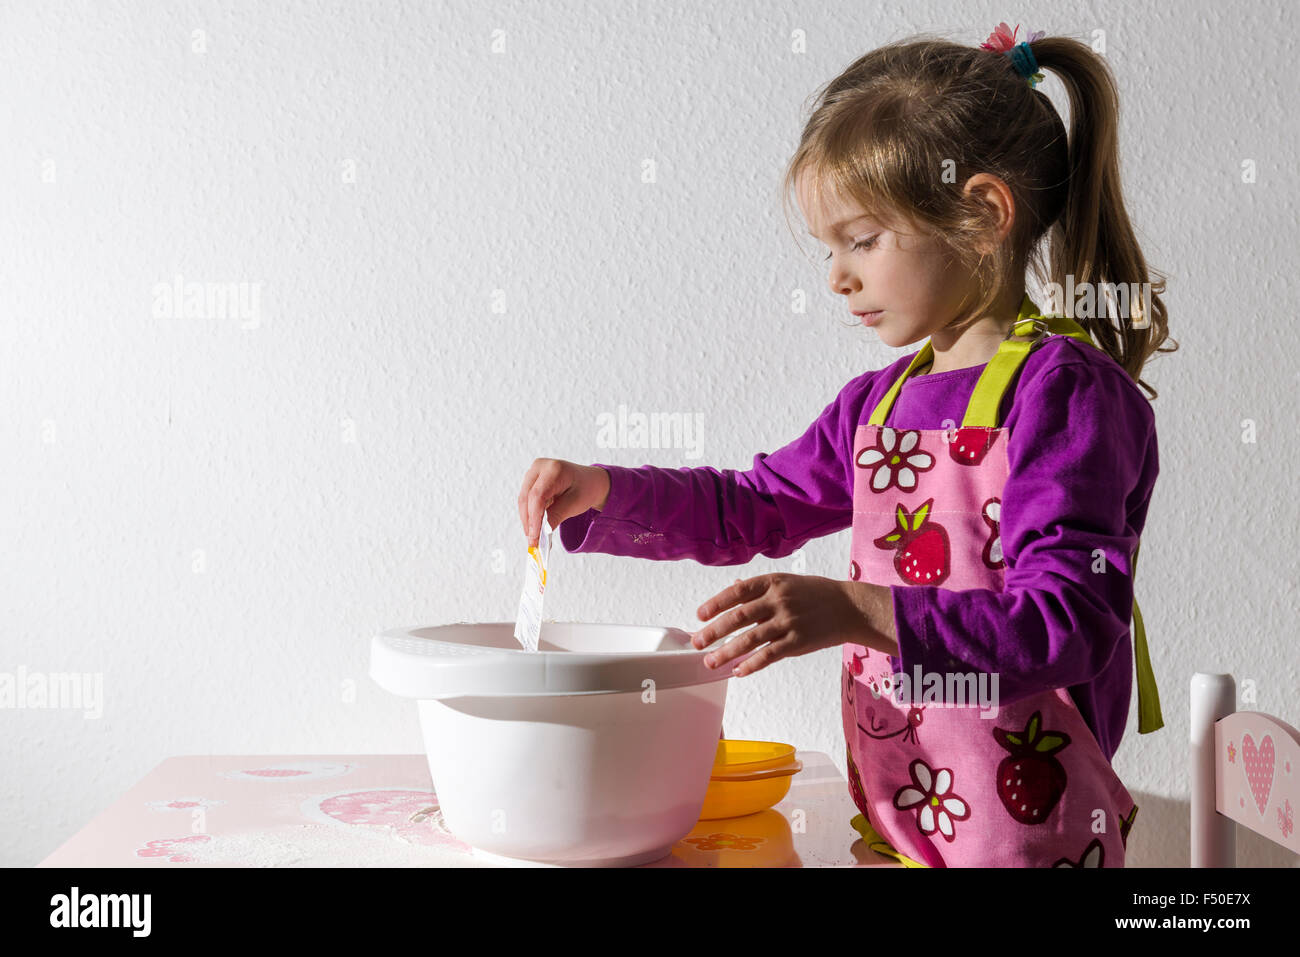 A blond three year old girl is baking Christmas cookies, pouring ingredients into a white bowl Stock Photo